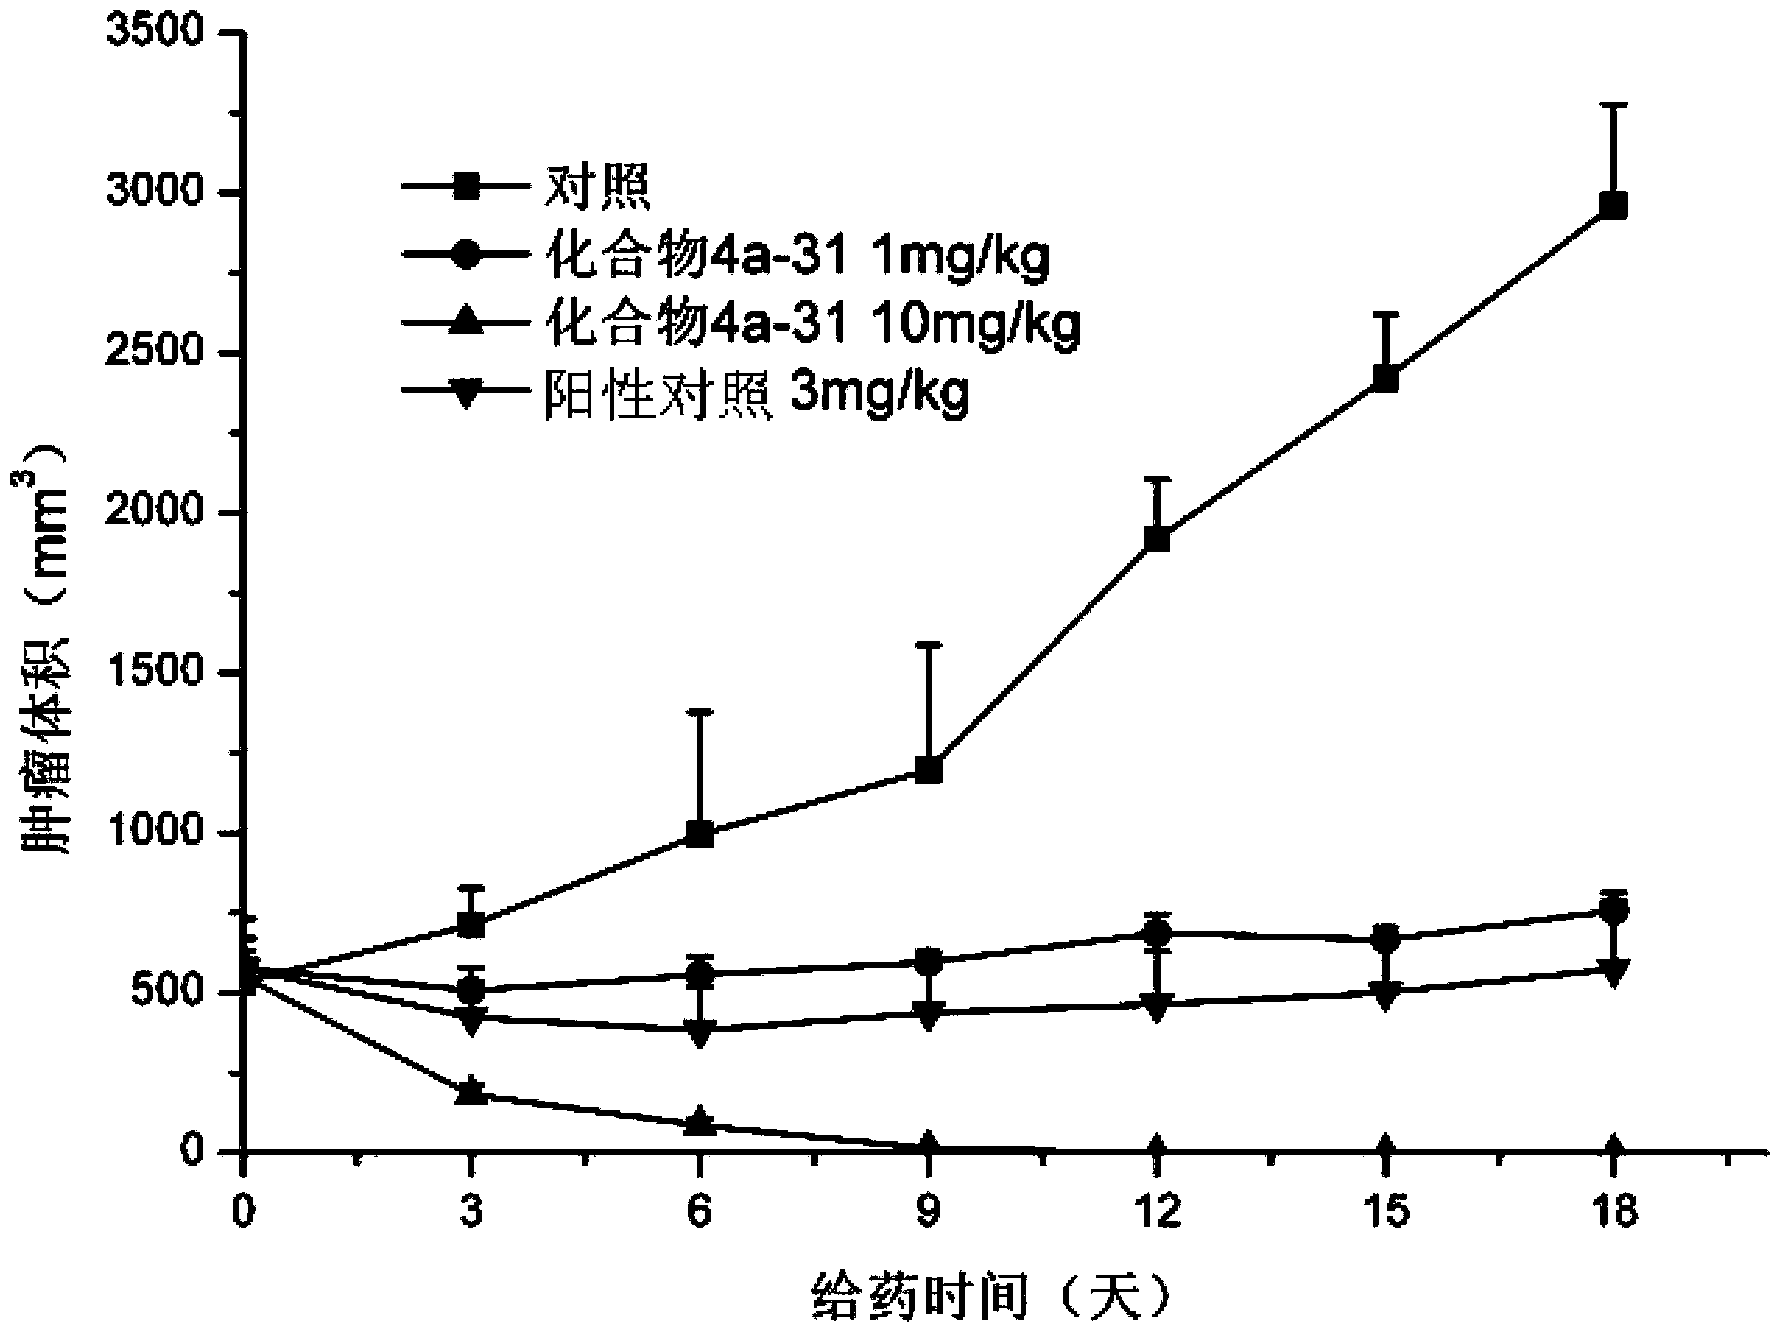 Pyrazolopyrimidine derivative, its preparation method, and its use in preparation of medicines